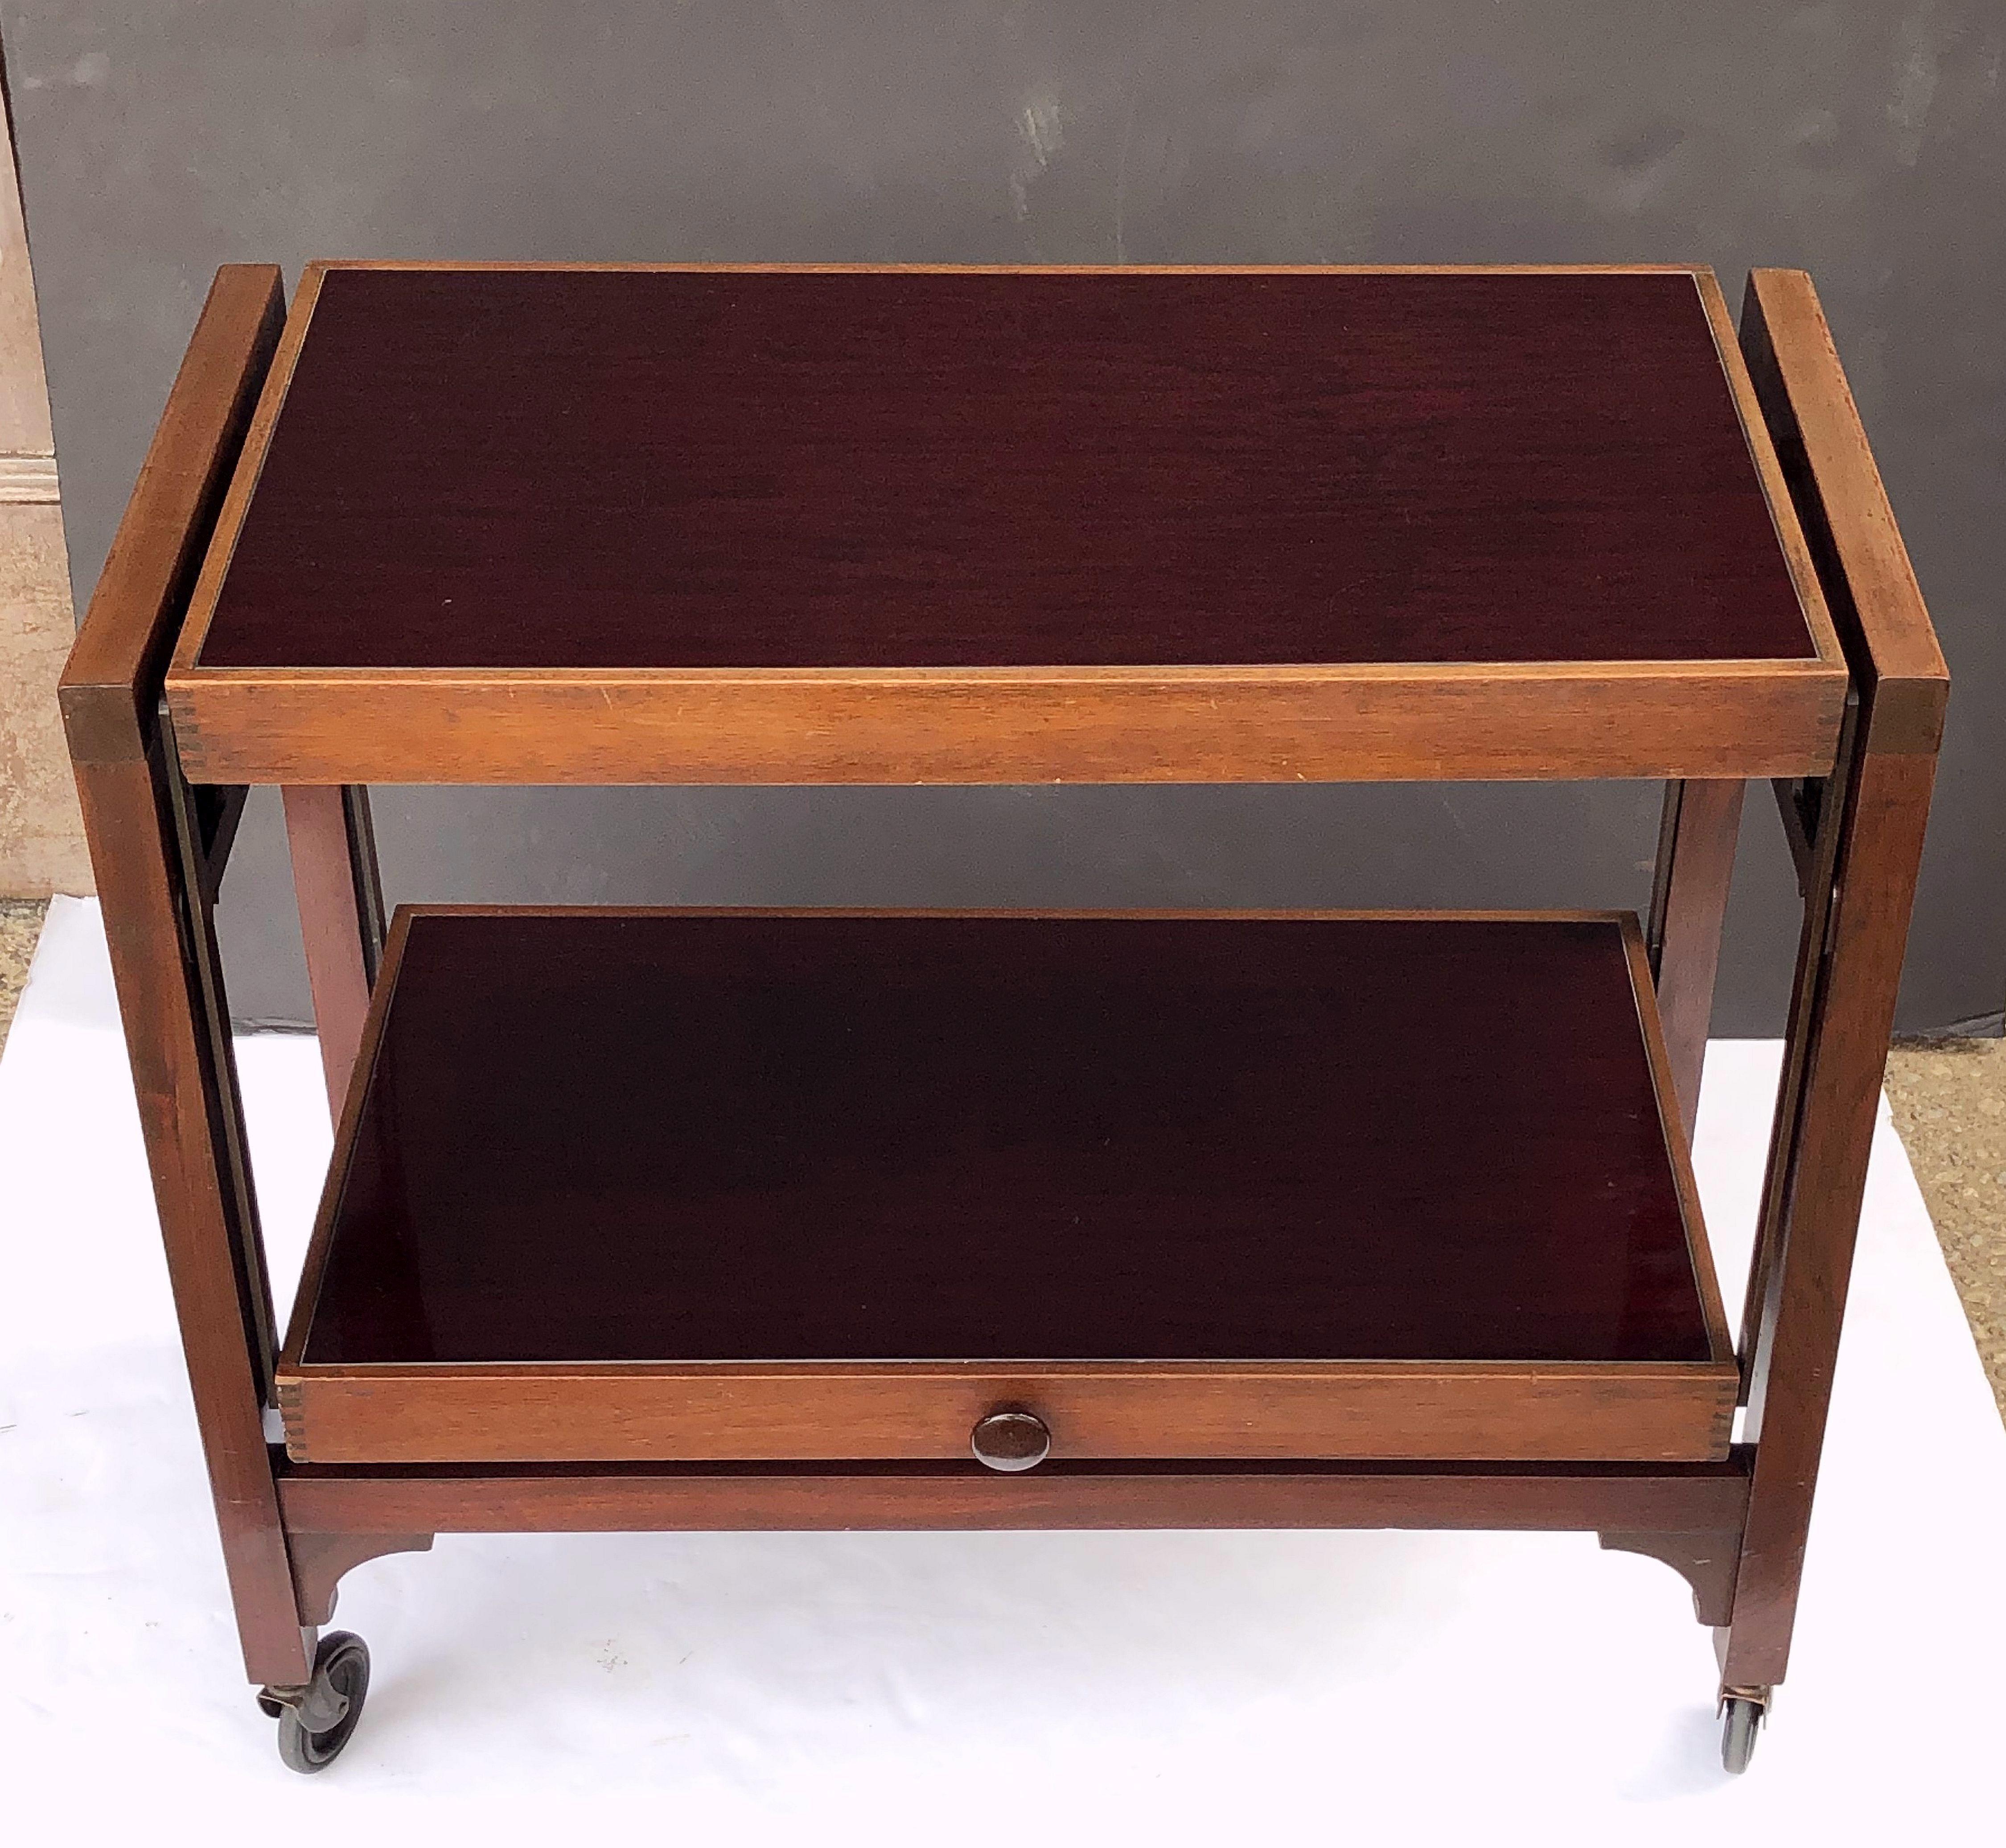 A fine English metamorphic drinks trolley or bar cart (also known as a besway or trimagic table), which converts into a useful occasional table via a mechanism triggered by pulling a knob situated on the middle tier.

This design was patented by